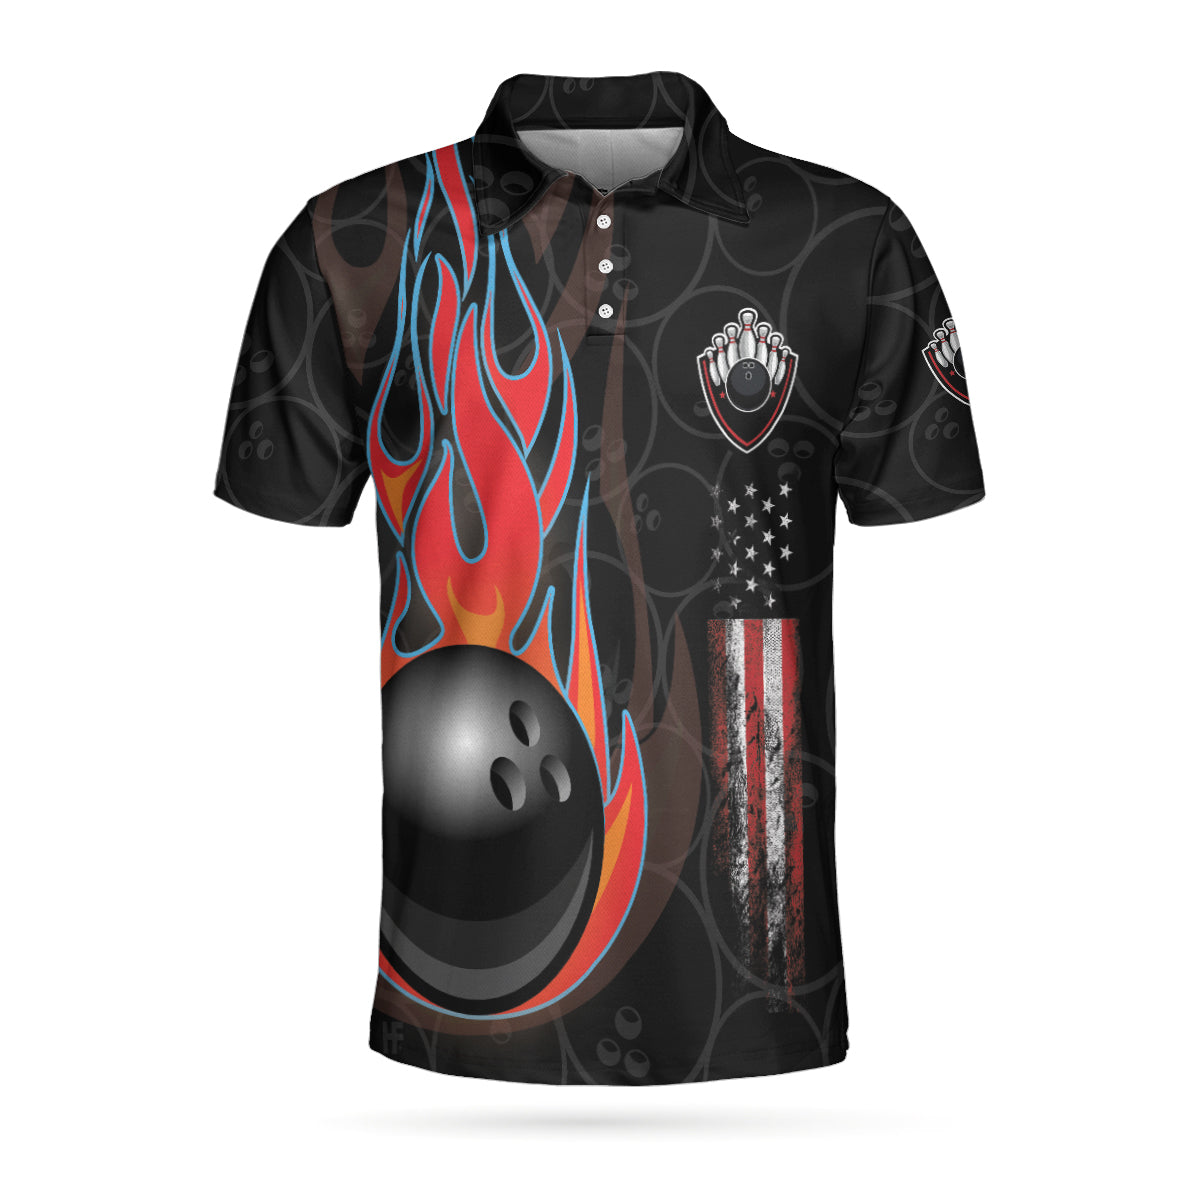 Bowling In Fire And American Flag Short Sleeve Polo Shirt/ Bowling Ball Polo Shirt/ Best Bowling Shirt For Men Coolspod